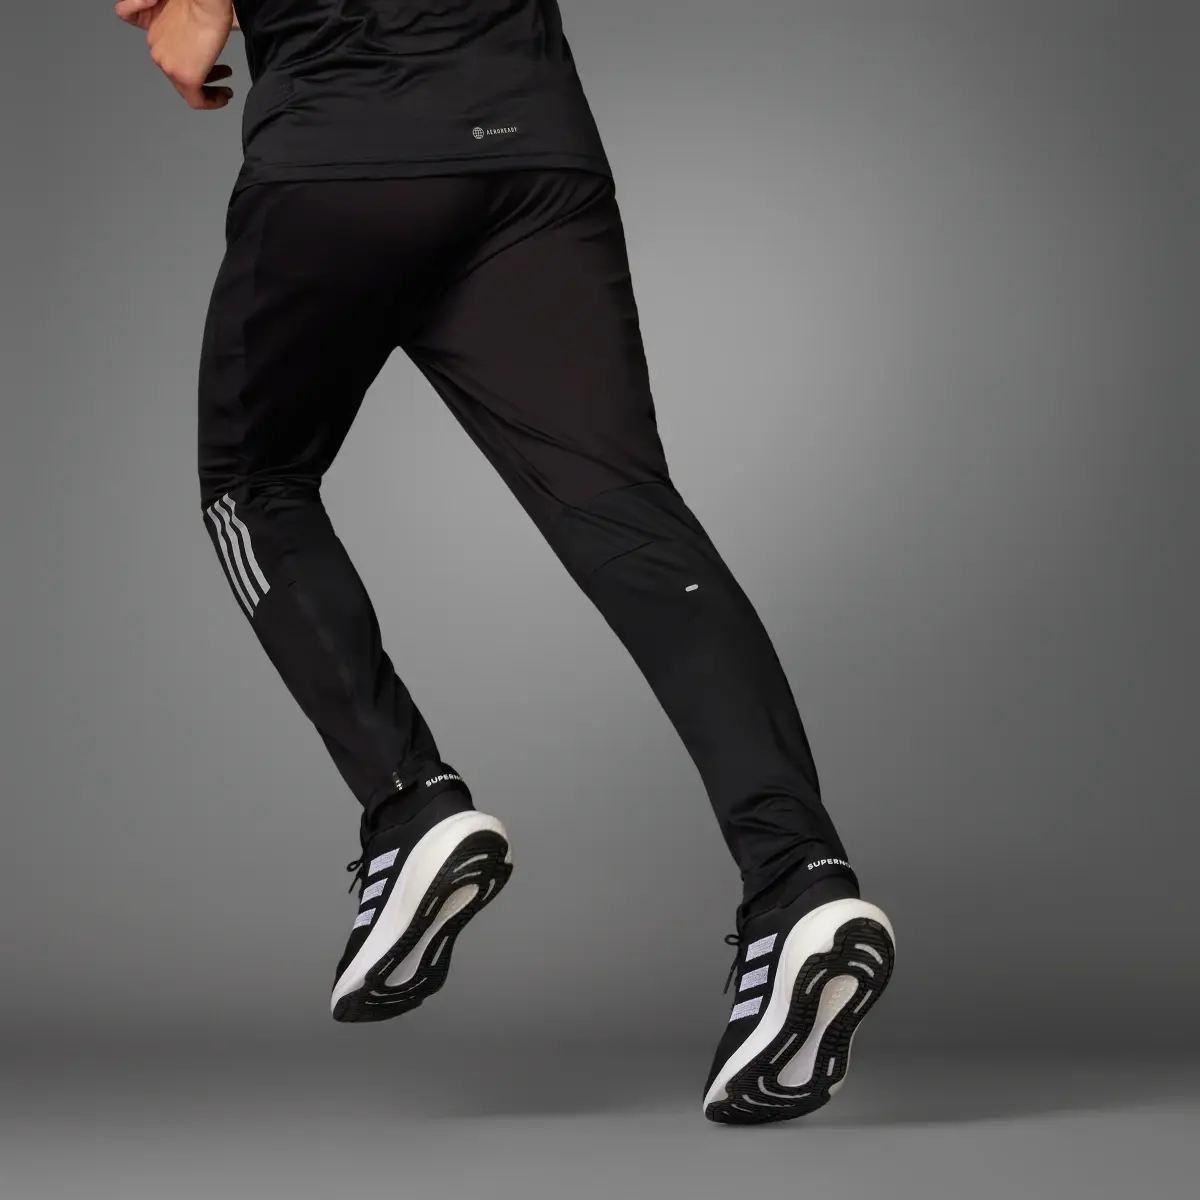 Adidas Own the Run Astro Knit Pants. 2